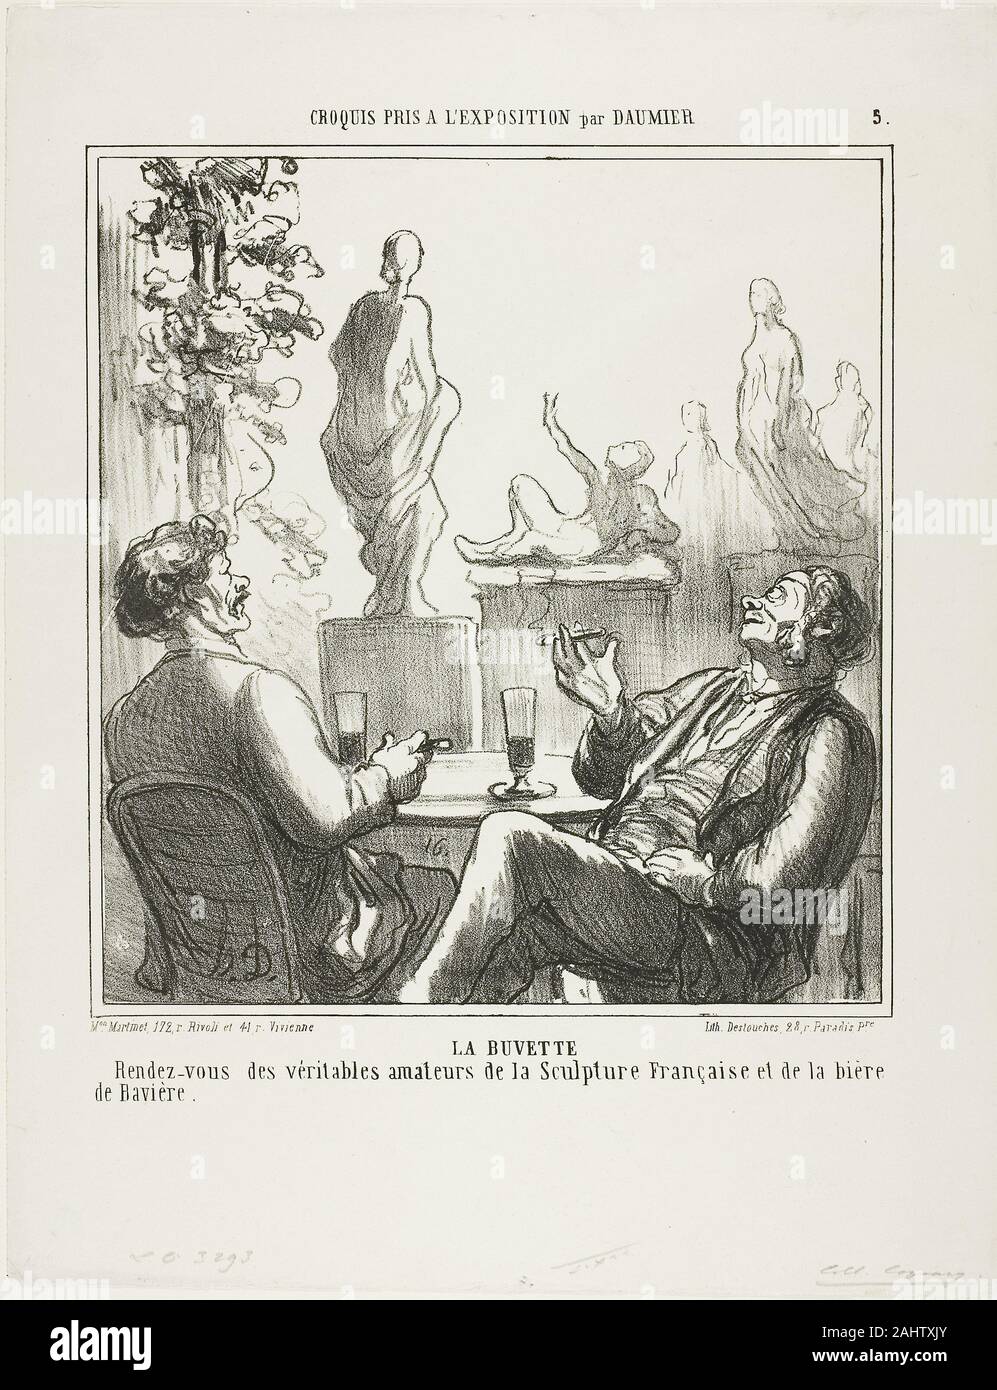 Honoré-Victorin Daumier. At The Bar. Meeting point for the true lovers of French sculpture and Bavarian beer, plate 5 from Croquis pris à l'exposition. 1865. France. Lithograph in black on white wove paper Daumier portrayed Salon exhibitions over several decades for comic journals such as La Caricature and Le Charivari, which published this lithograph. This print suggests the different reasons for which visitors came to Paris and the Salon. Shown here are flaneurs who install themselves by the bar, sarcastically labeled by Daumier as “the true lovers” of art, implying that a real Salon enthusi Stock Photo